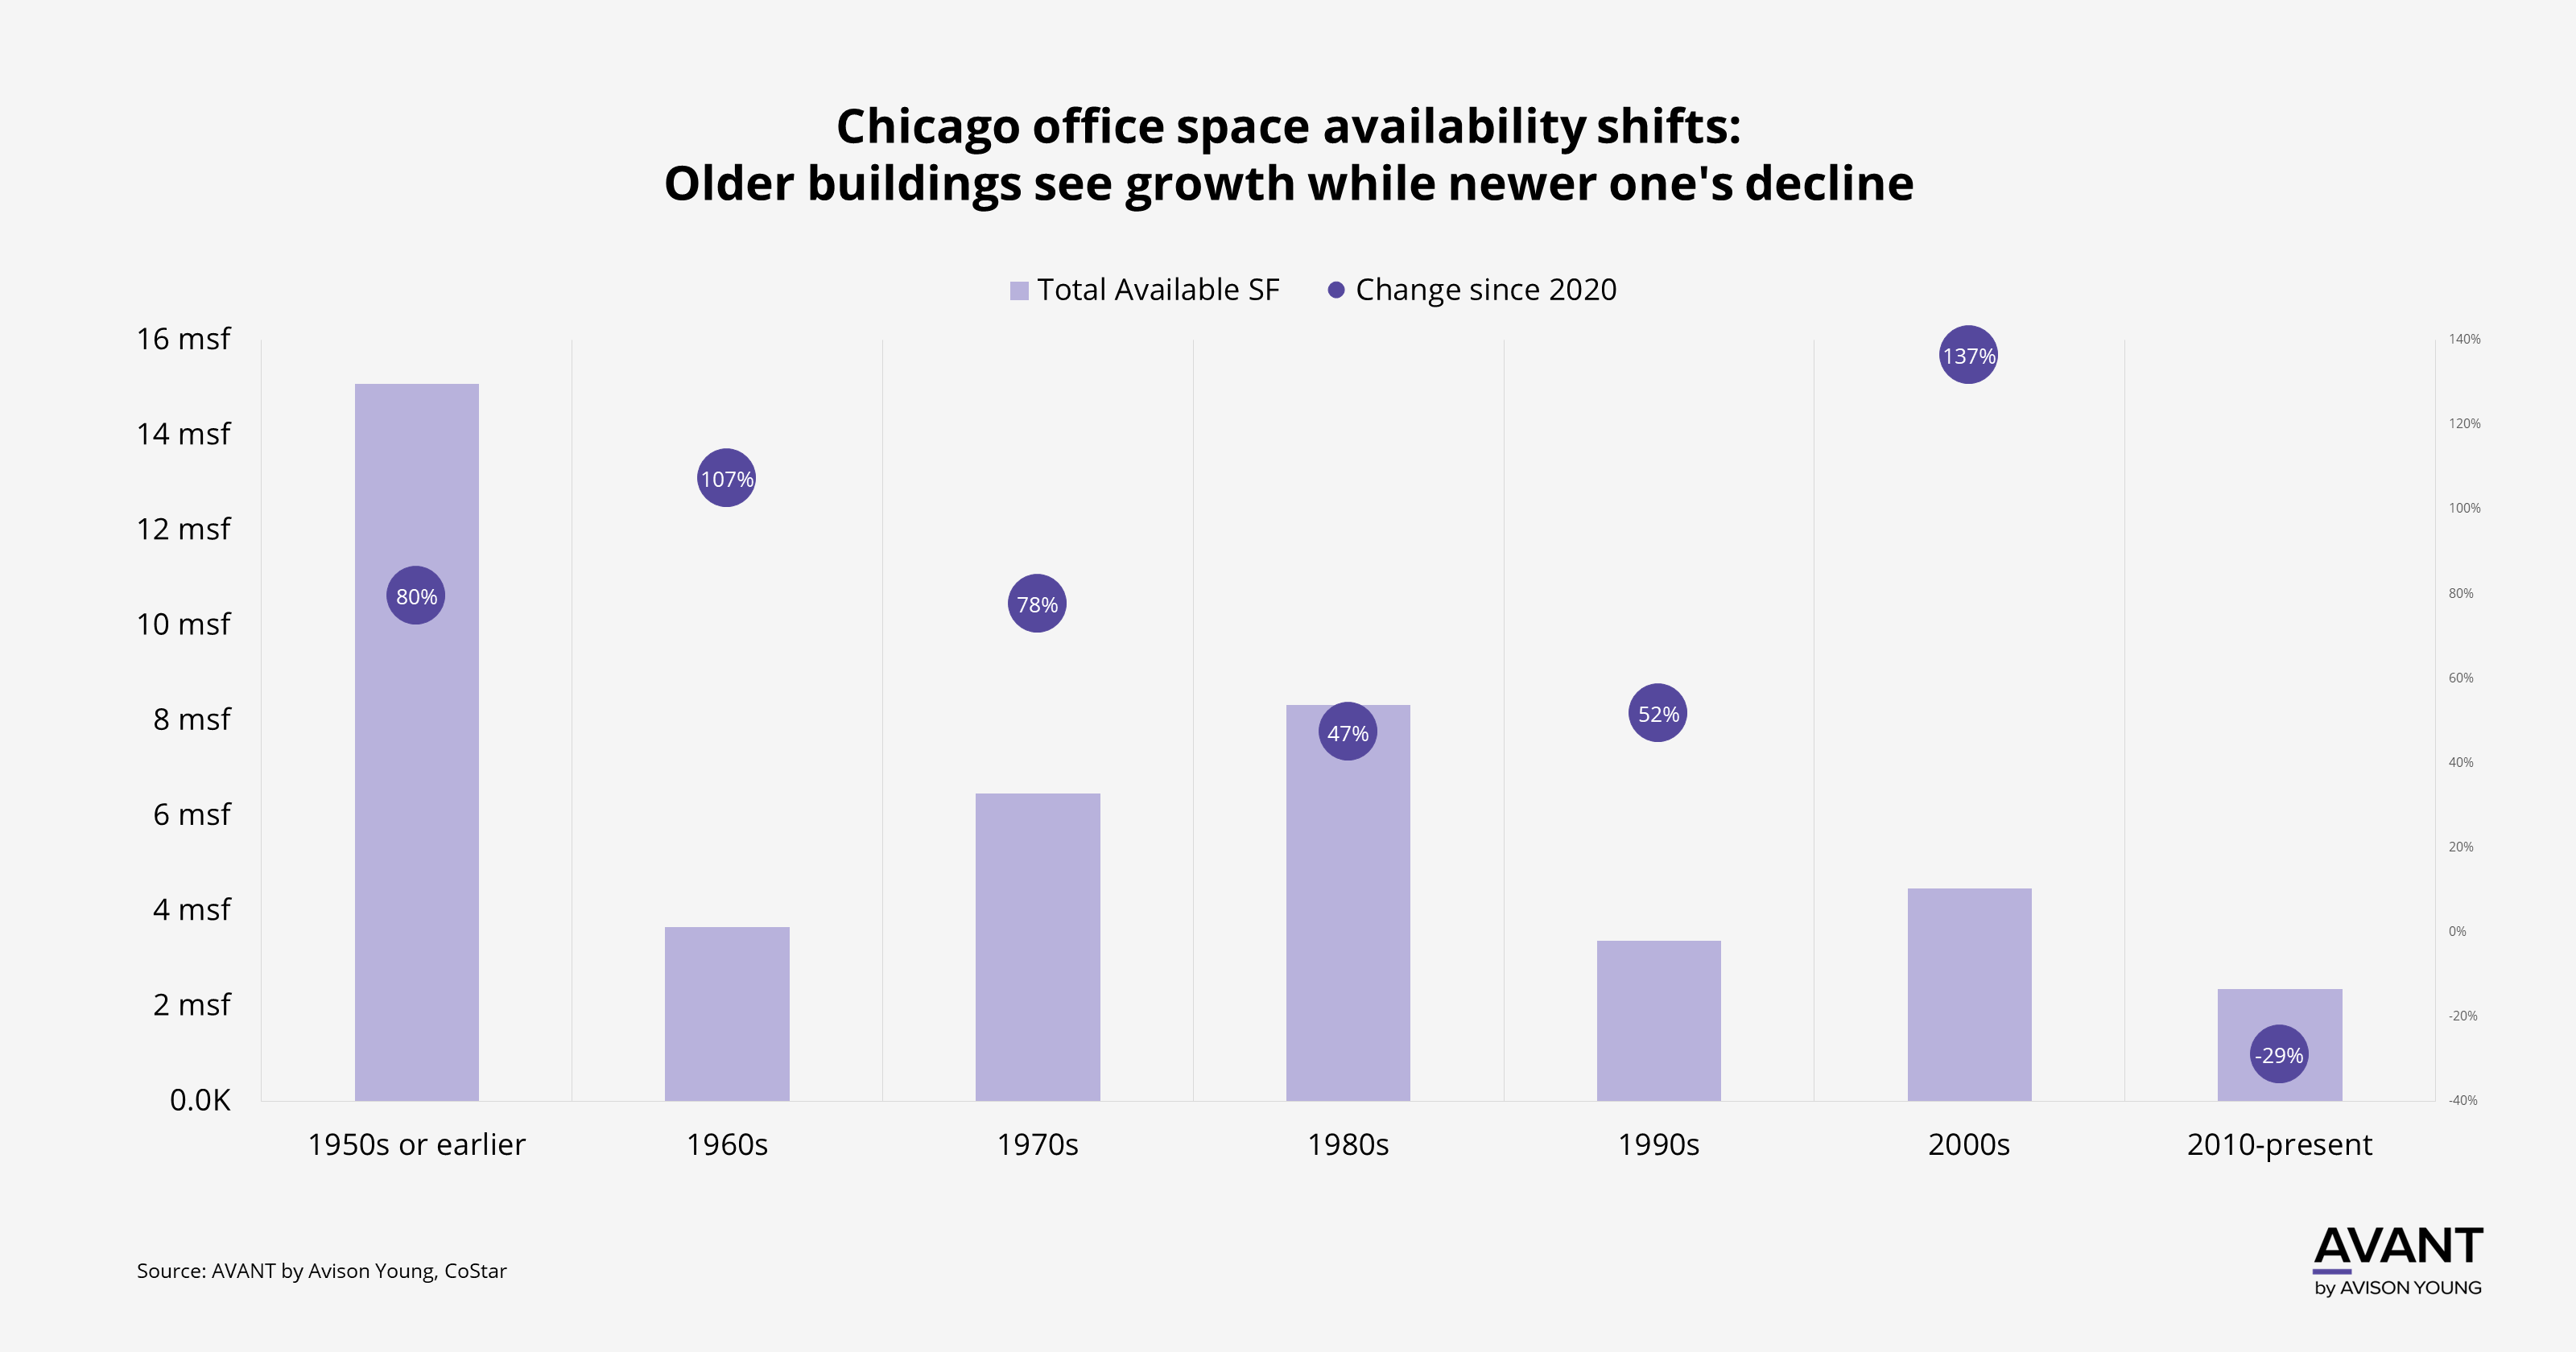 Chicago market inventory chart displaying decades of when buildings were built, their respective total size in SF and their growth in available space since 2020.